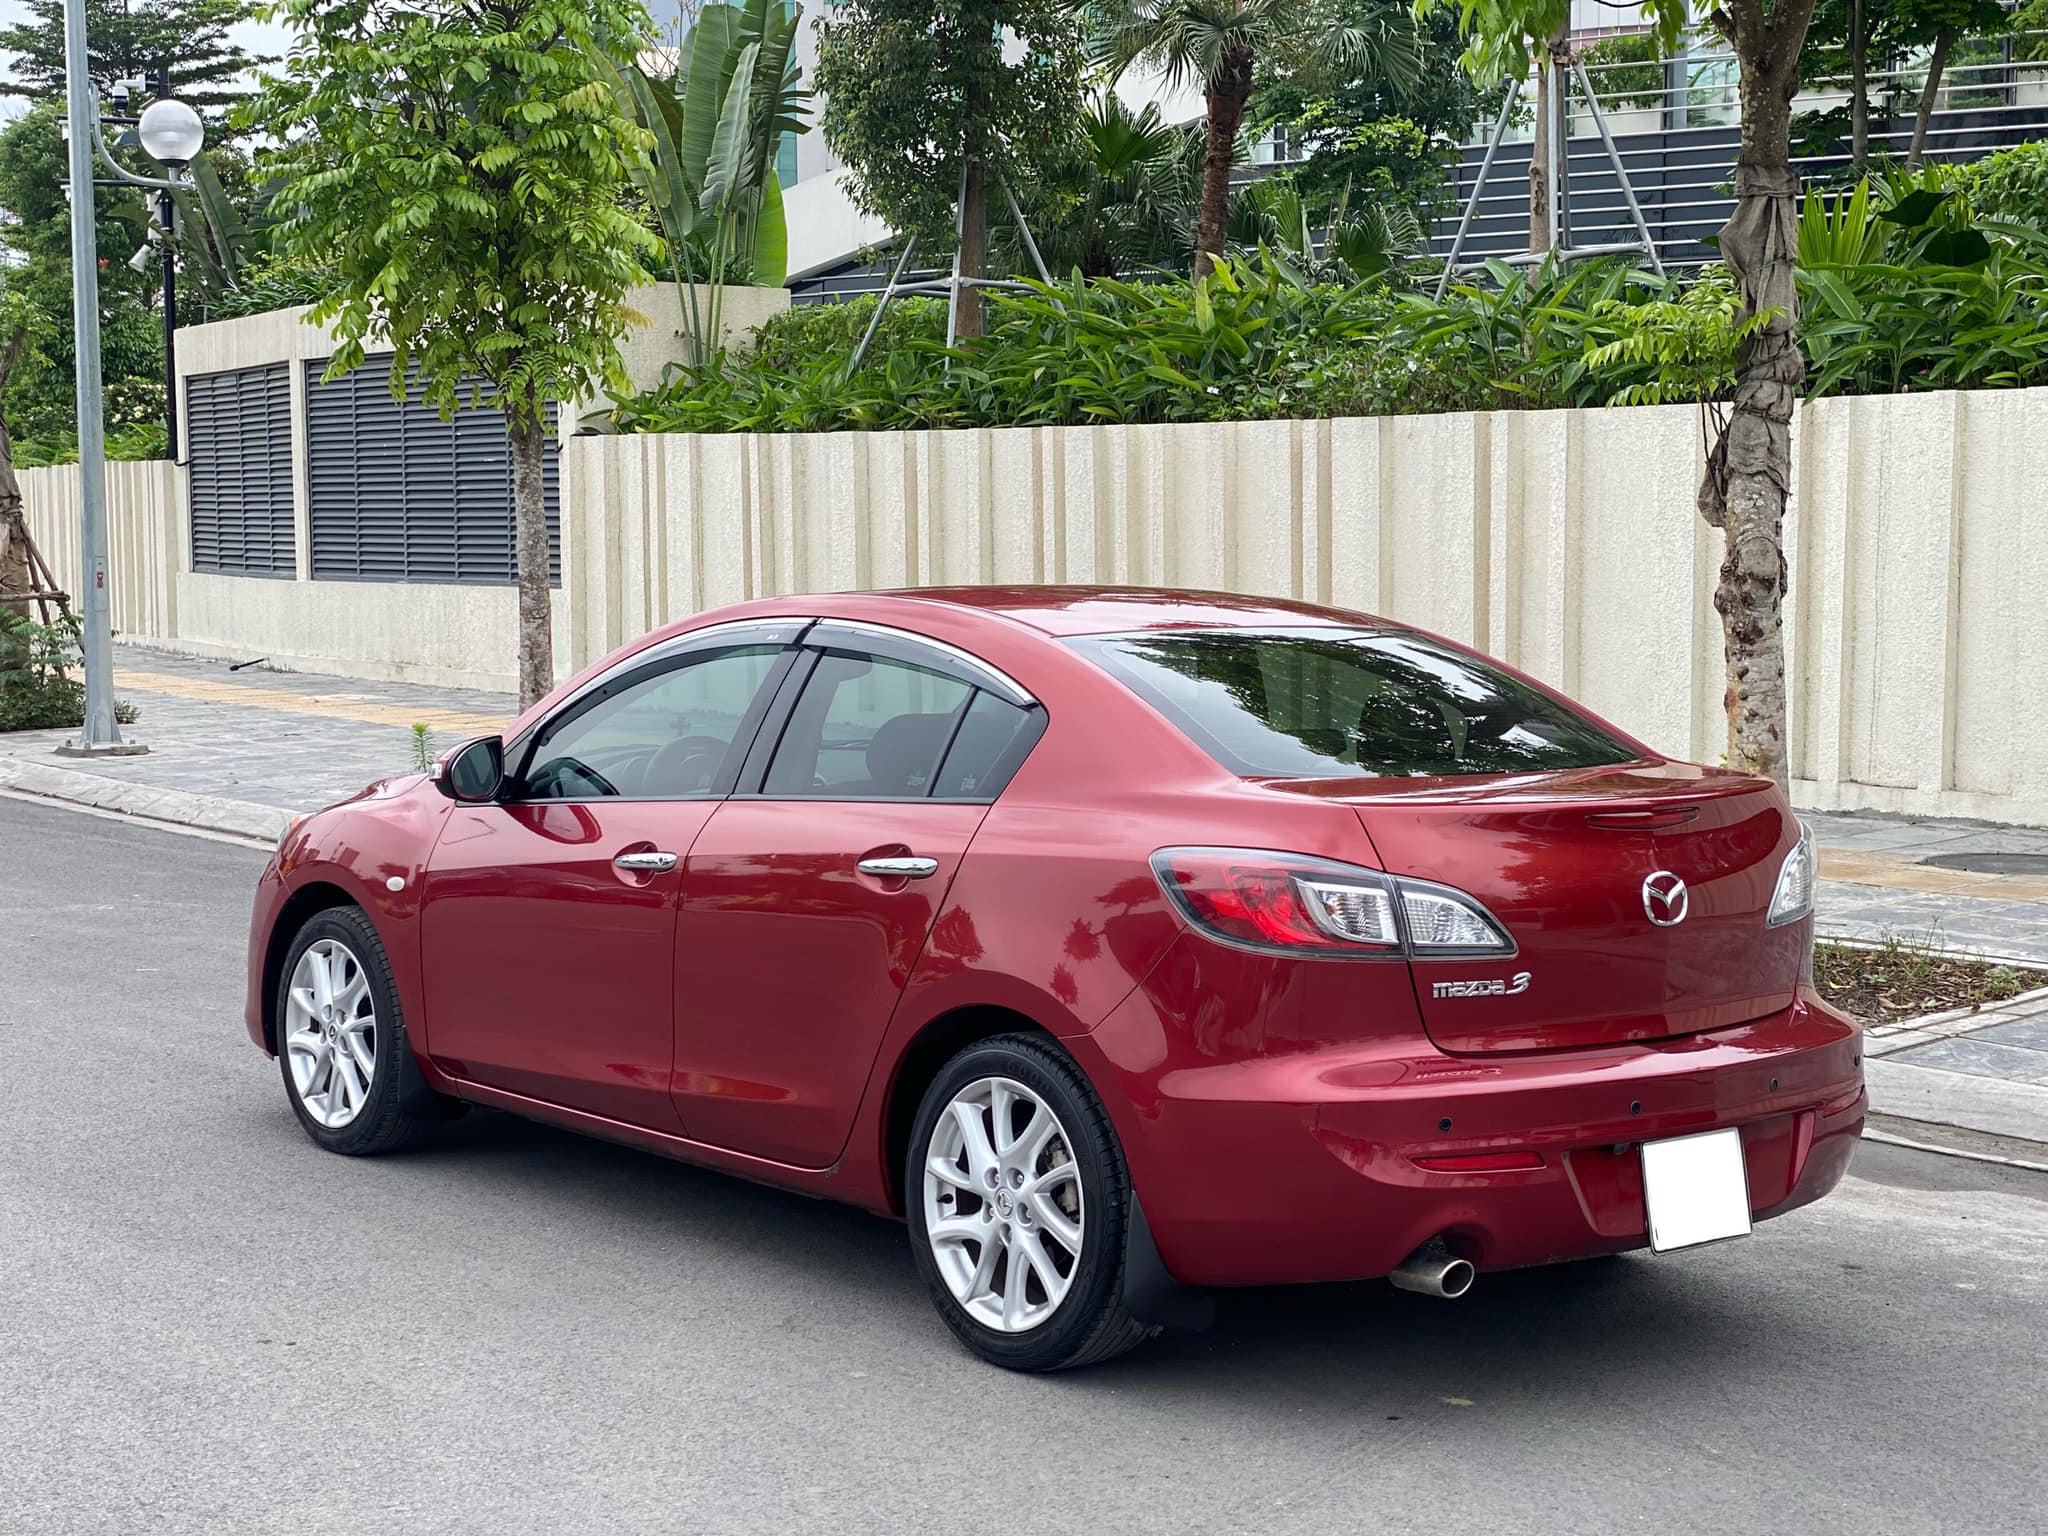 2013 Mazda 3 Reviews Ratings Prices  Consumer Reports